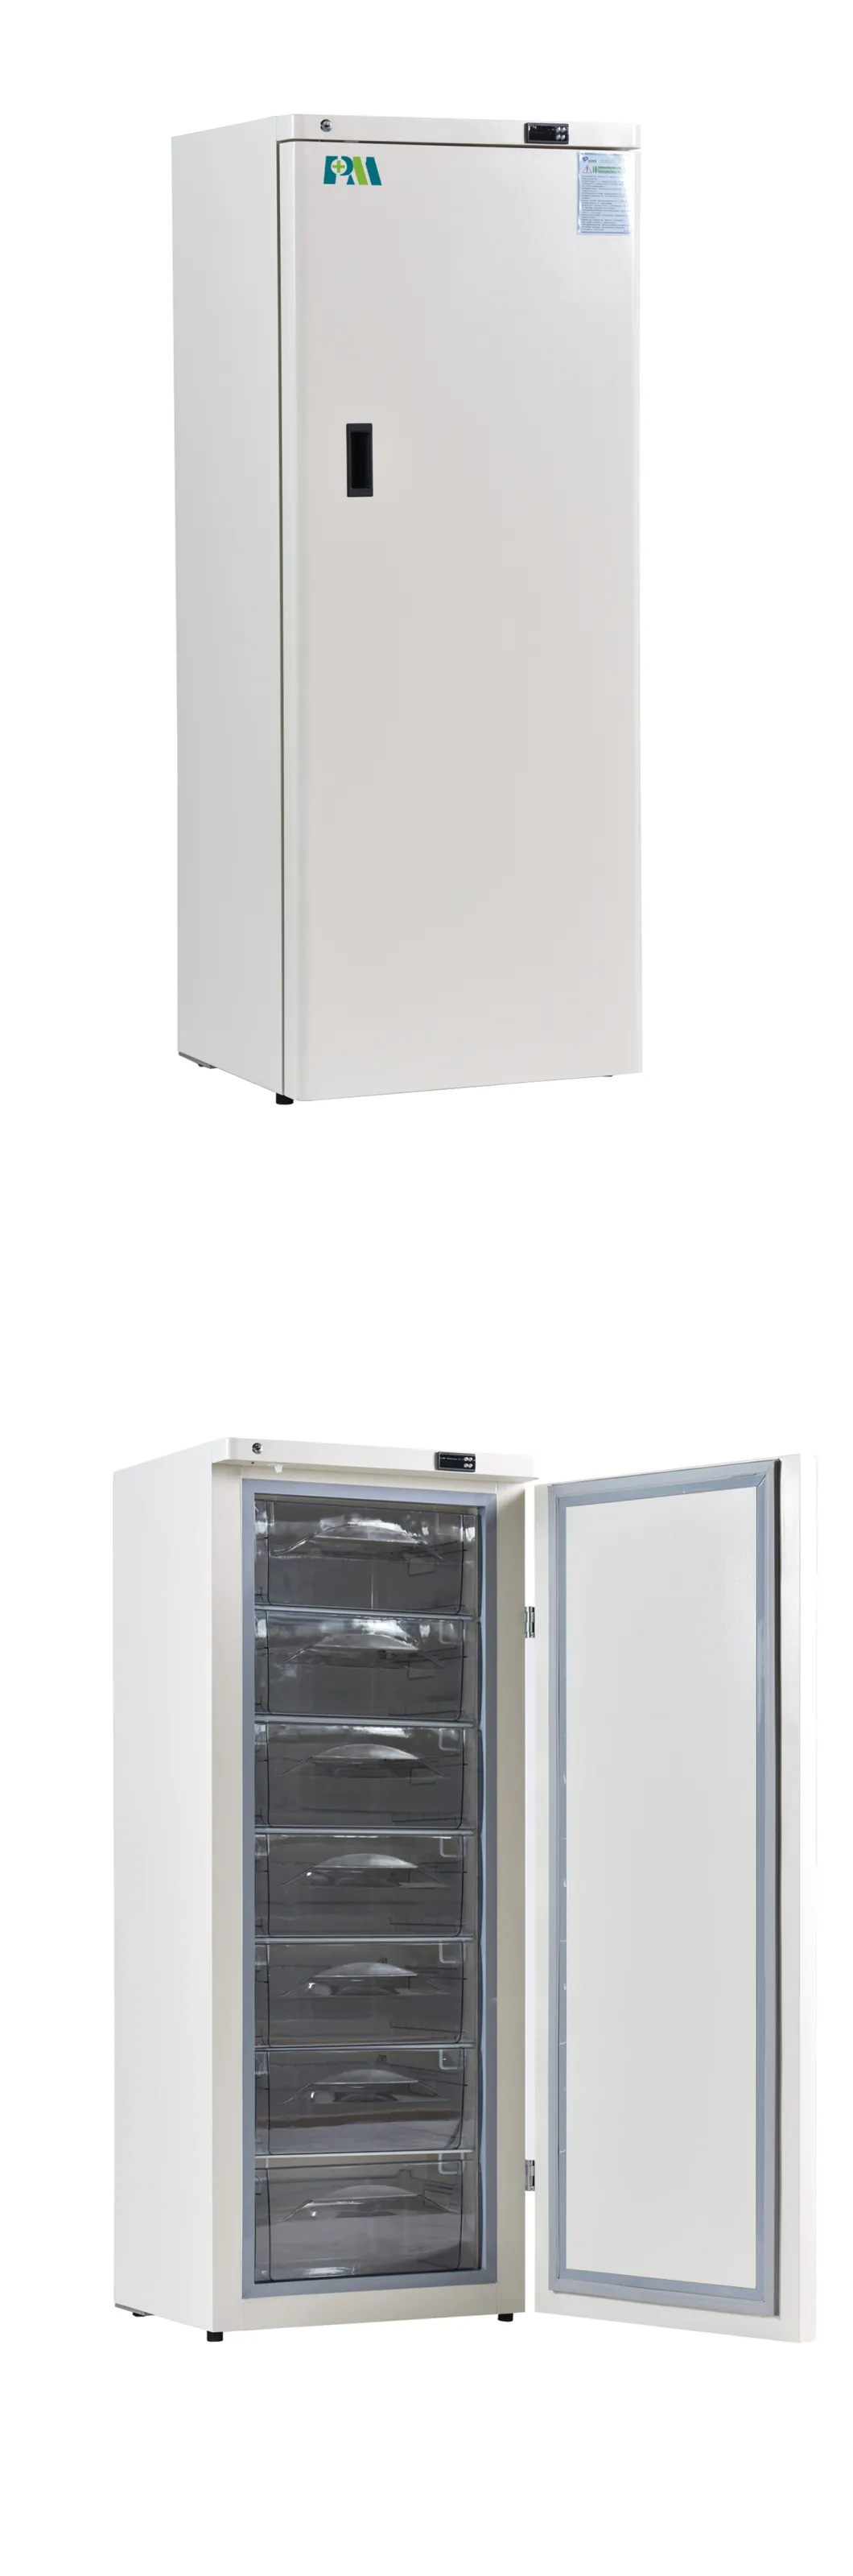 Energy Saving -40 Degrees Upright 278 Liters Medical Deep Freezer with Multi Drawers